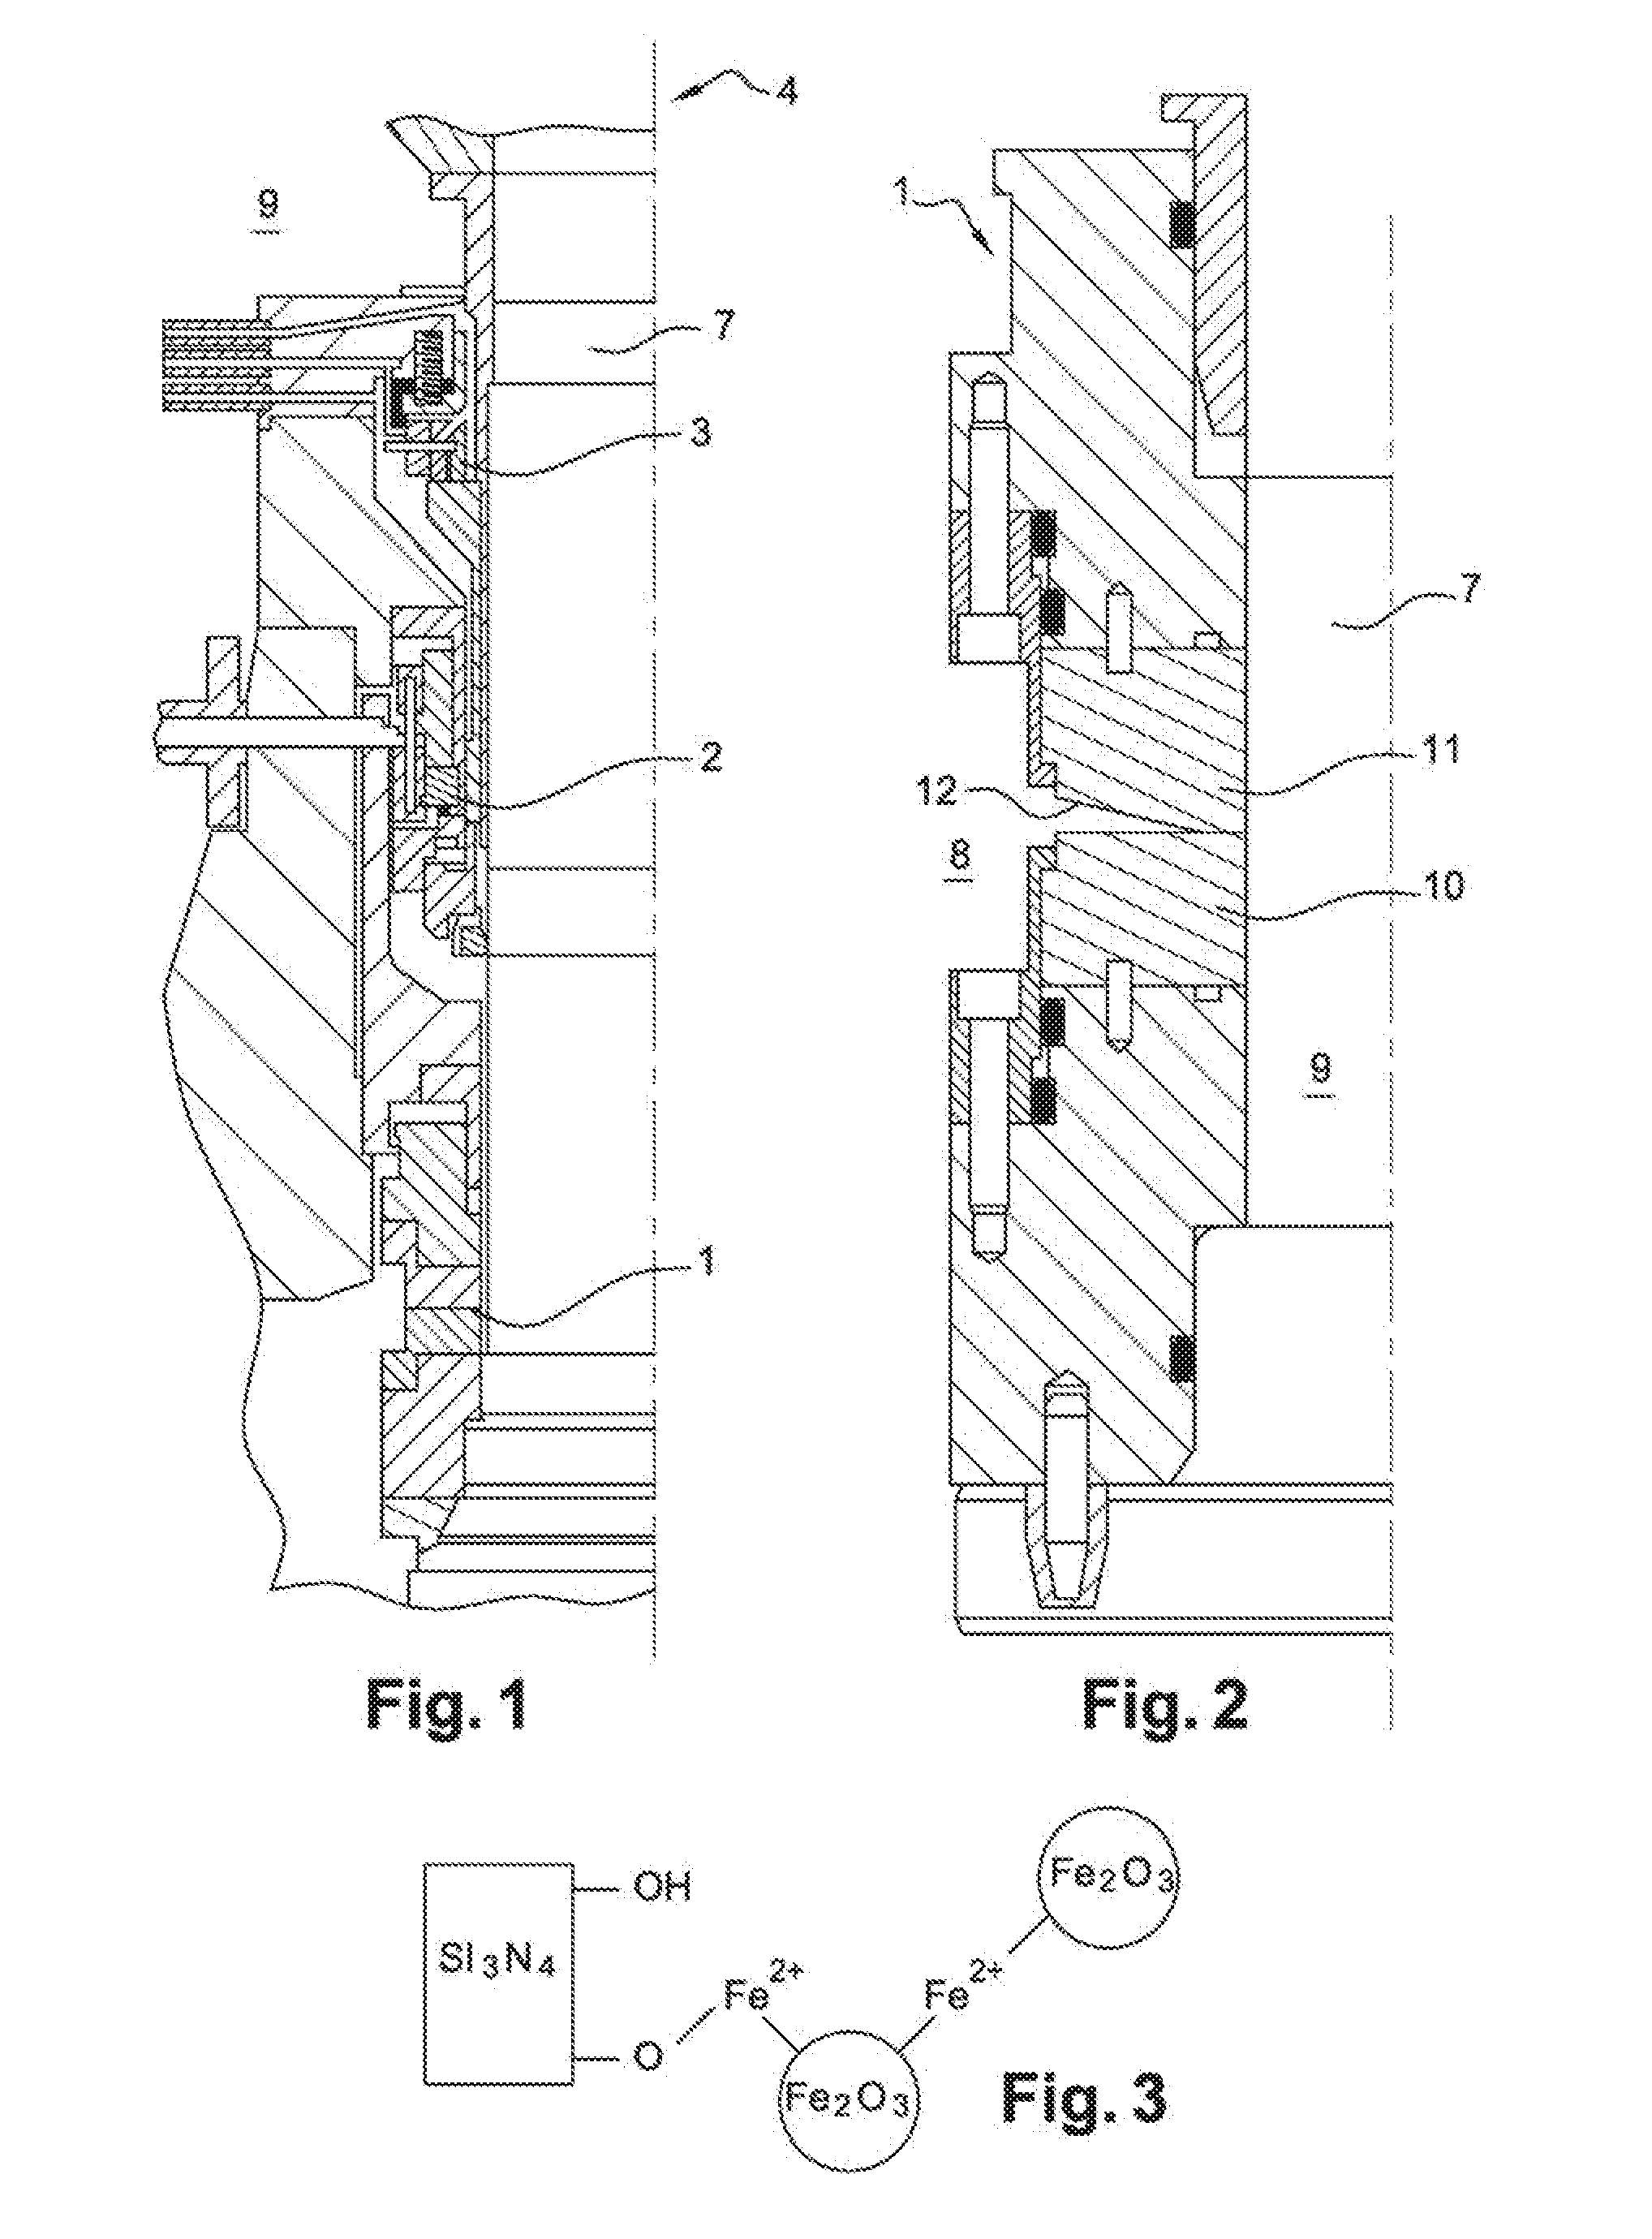 Active surface for a packing seal intended for a shaft sealing system